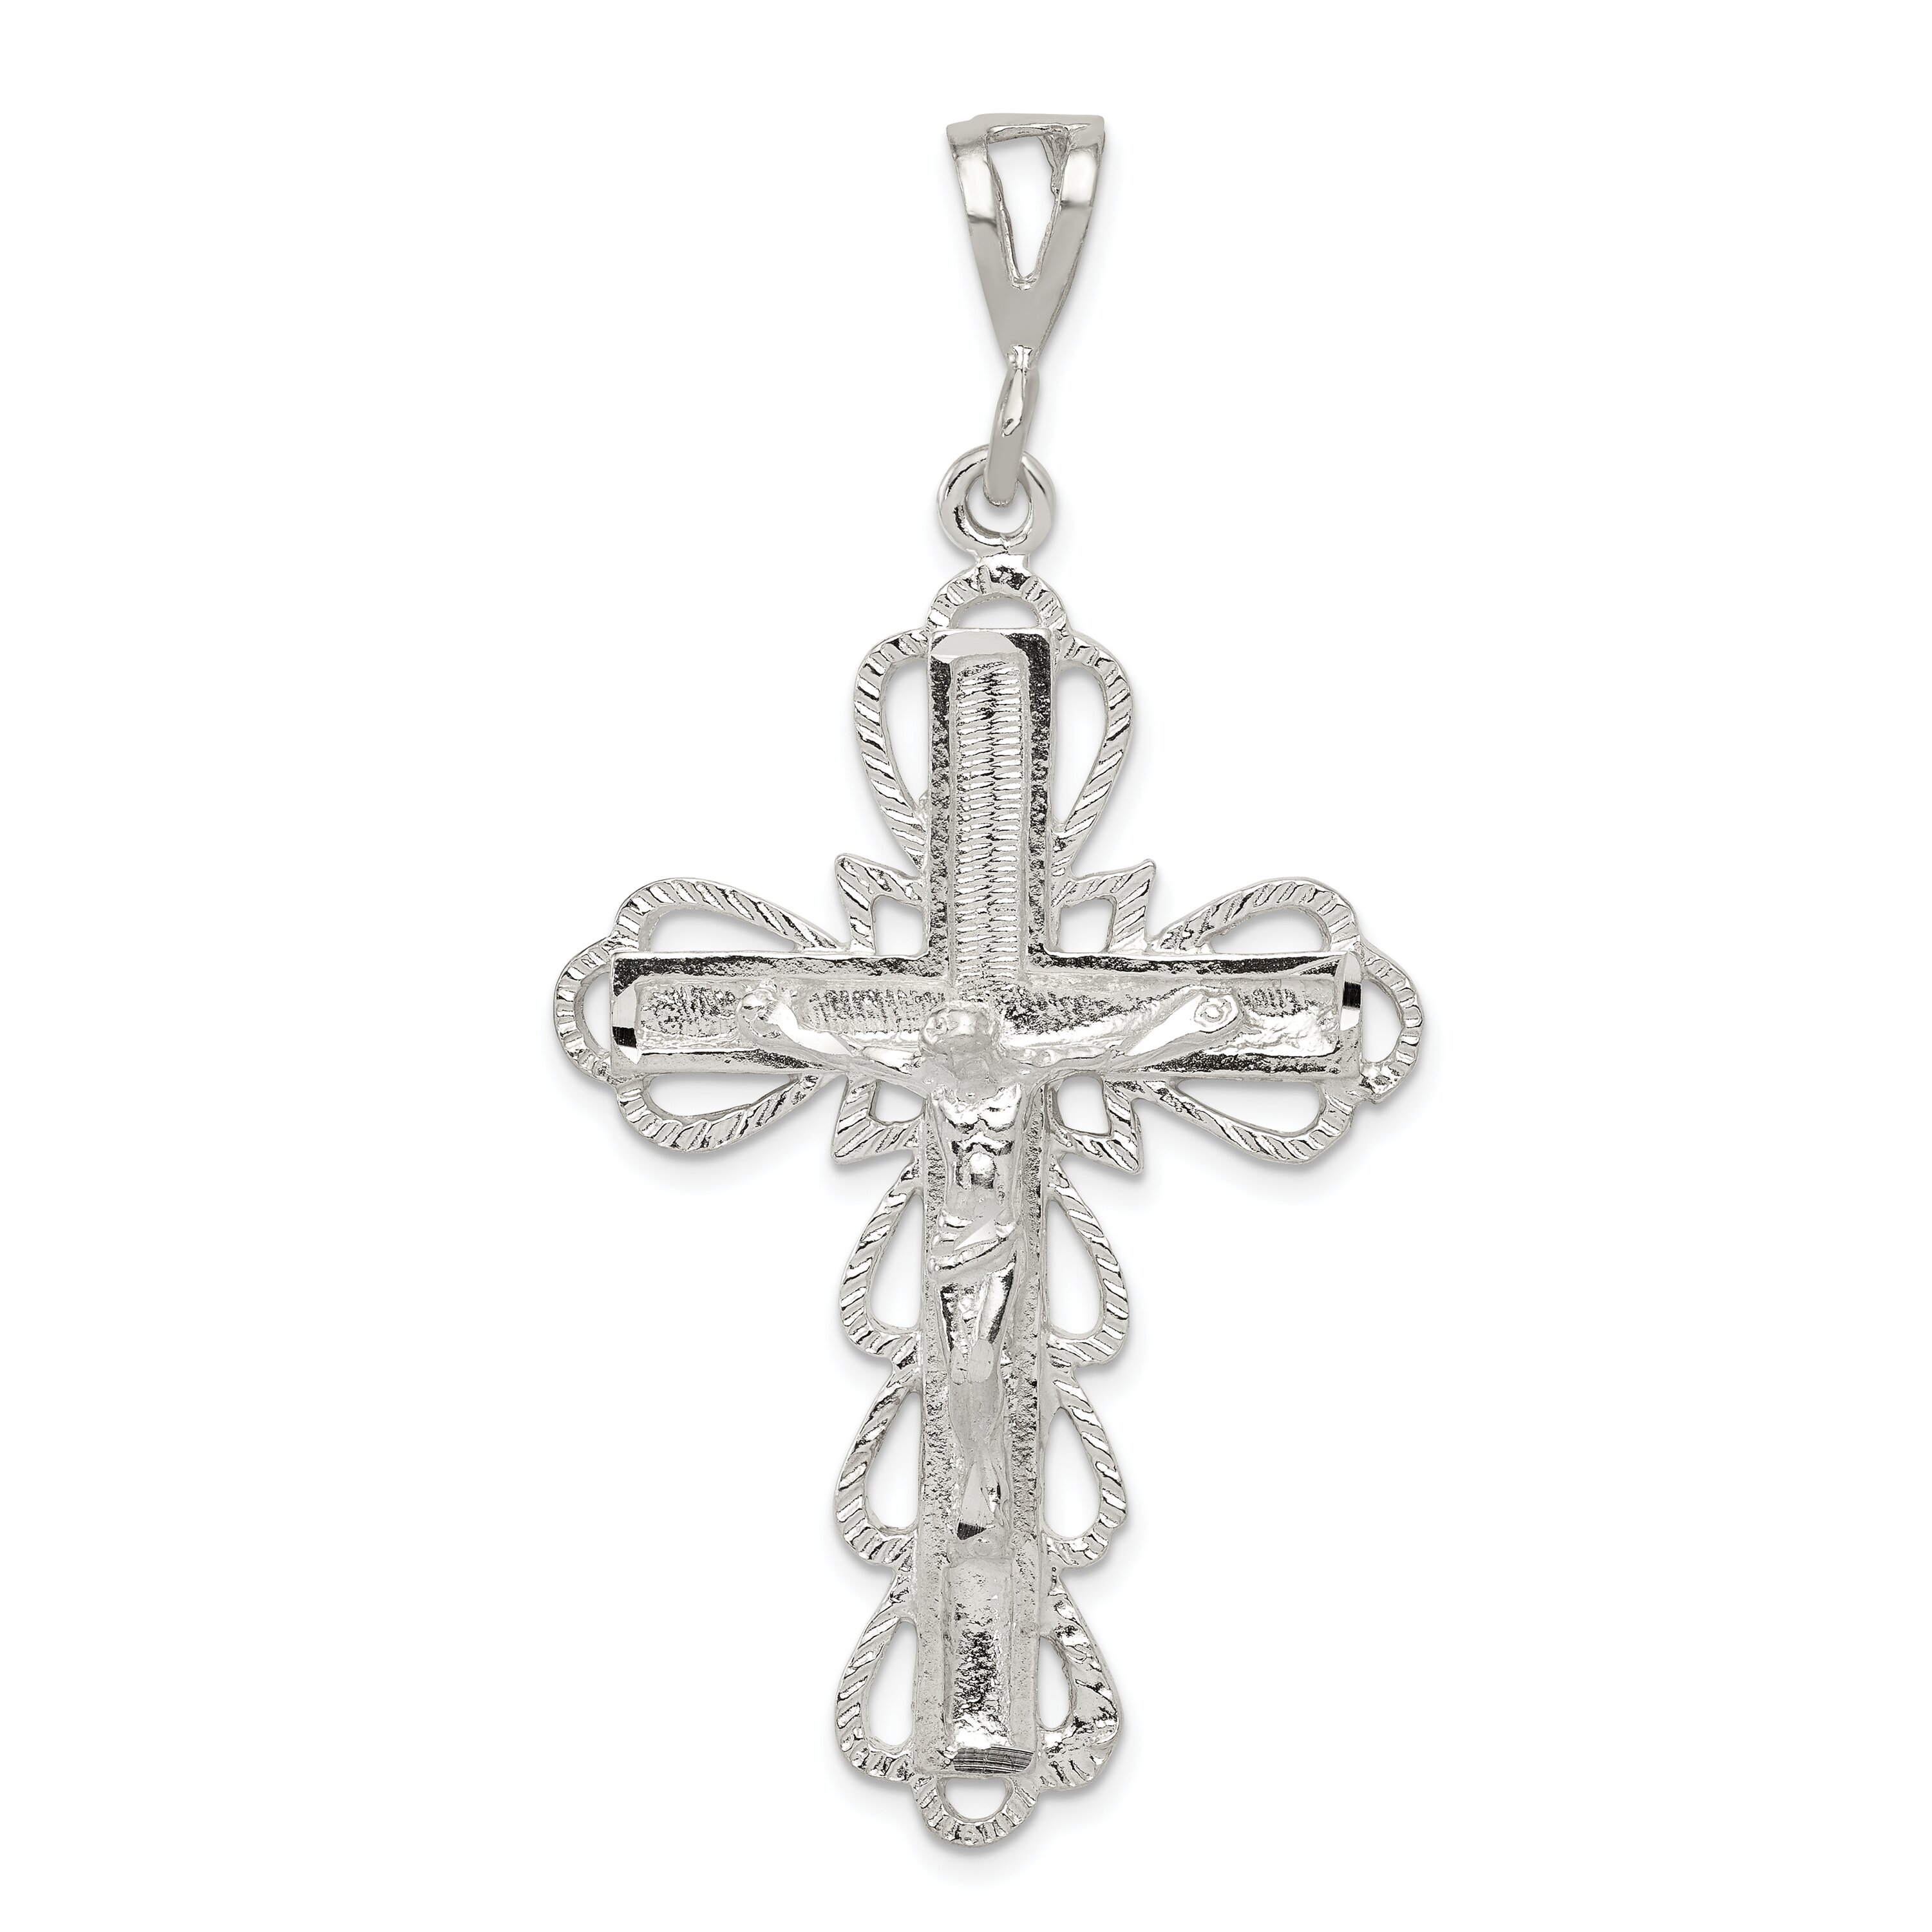 Findingking Sterling Silver Crucifix Pendant Religious Jewelry